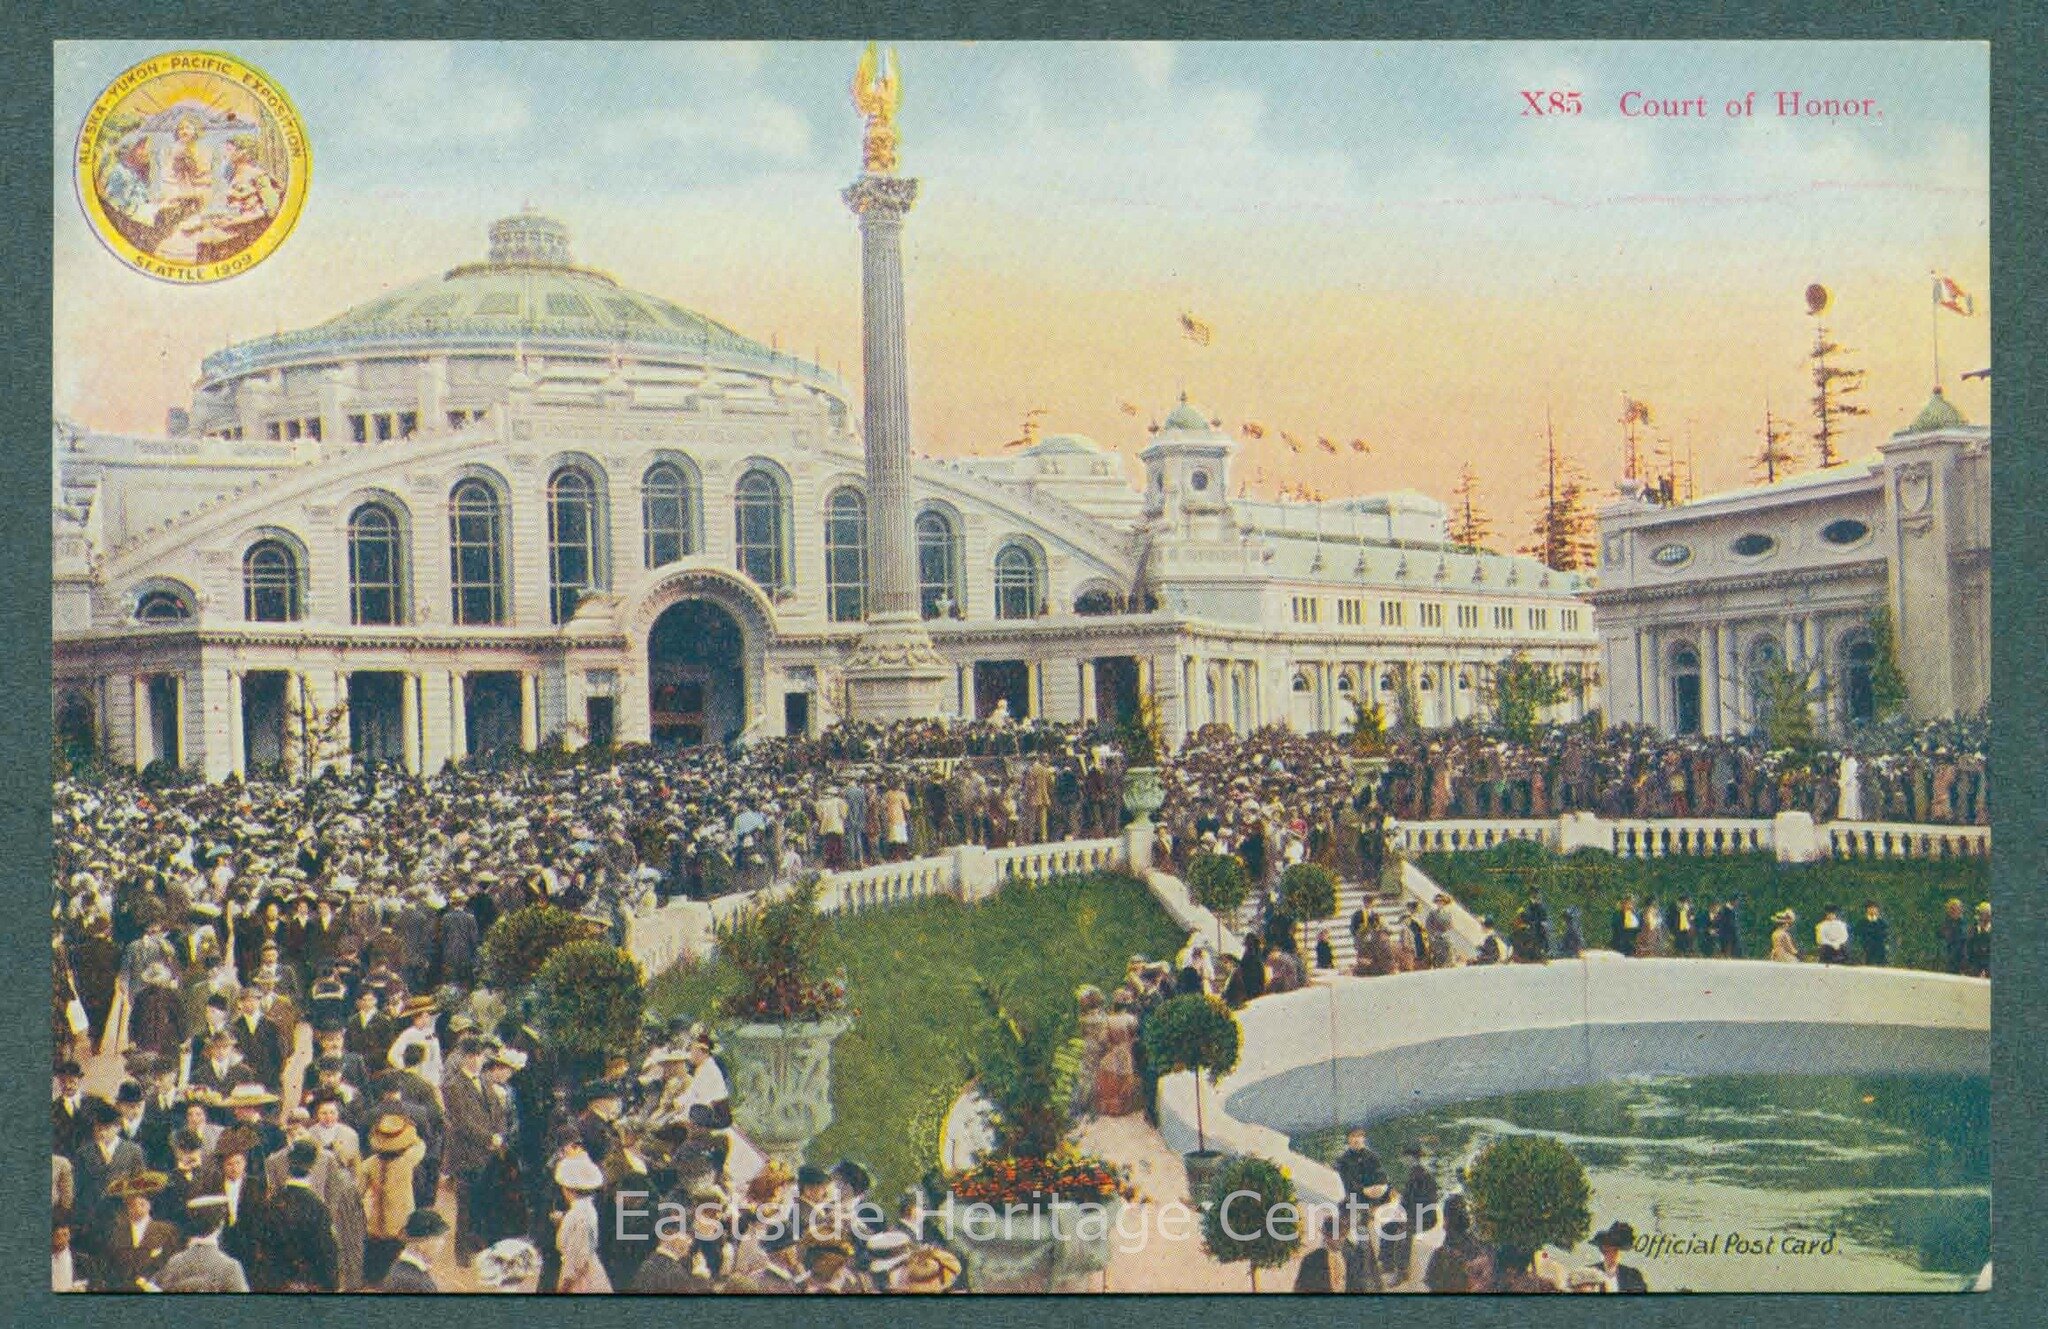 Join us today for a free lecture about the Alaska Yukon Pacific Exposition!

📍Bellevue Library 1PM

Image: (2009.003.047) Alaska Yukon Pacific Exposition Postcard, Court of Honor, 1909.